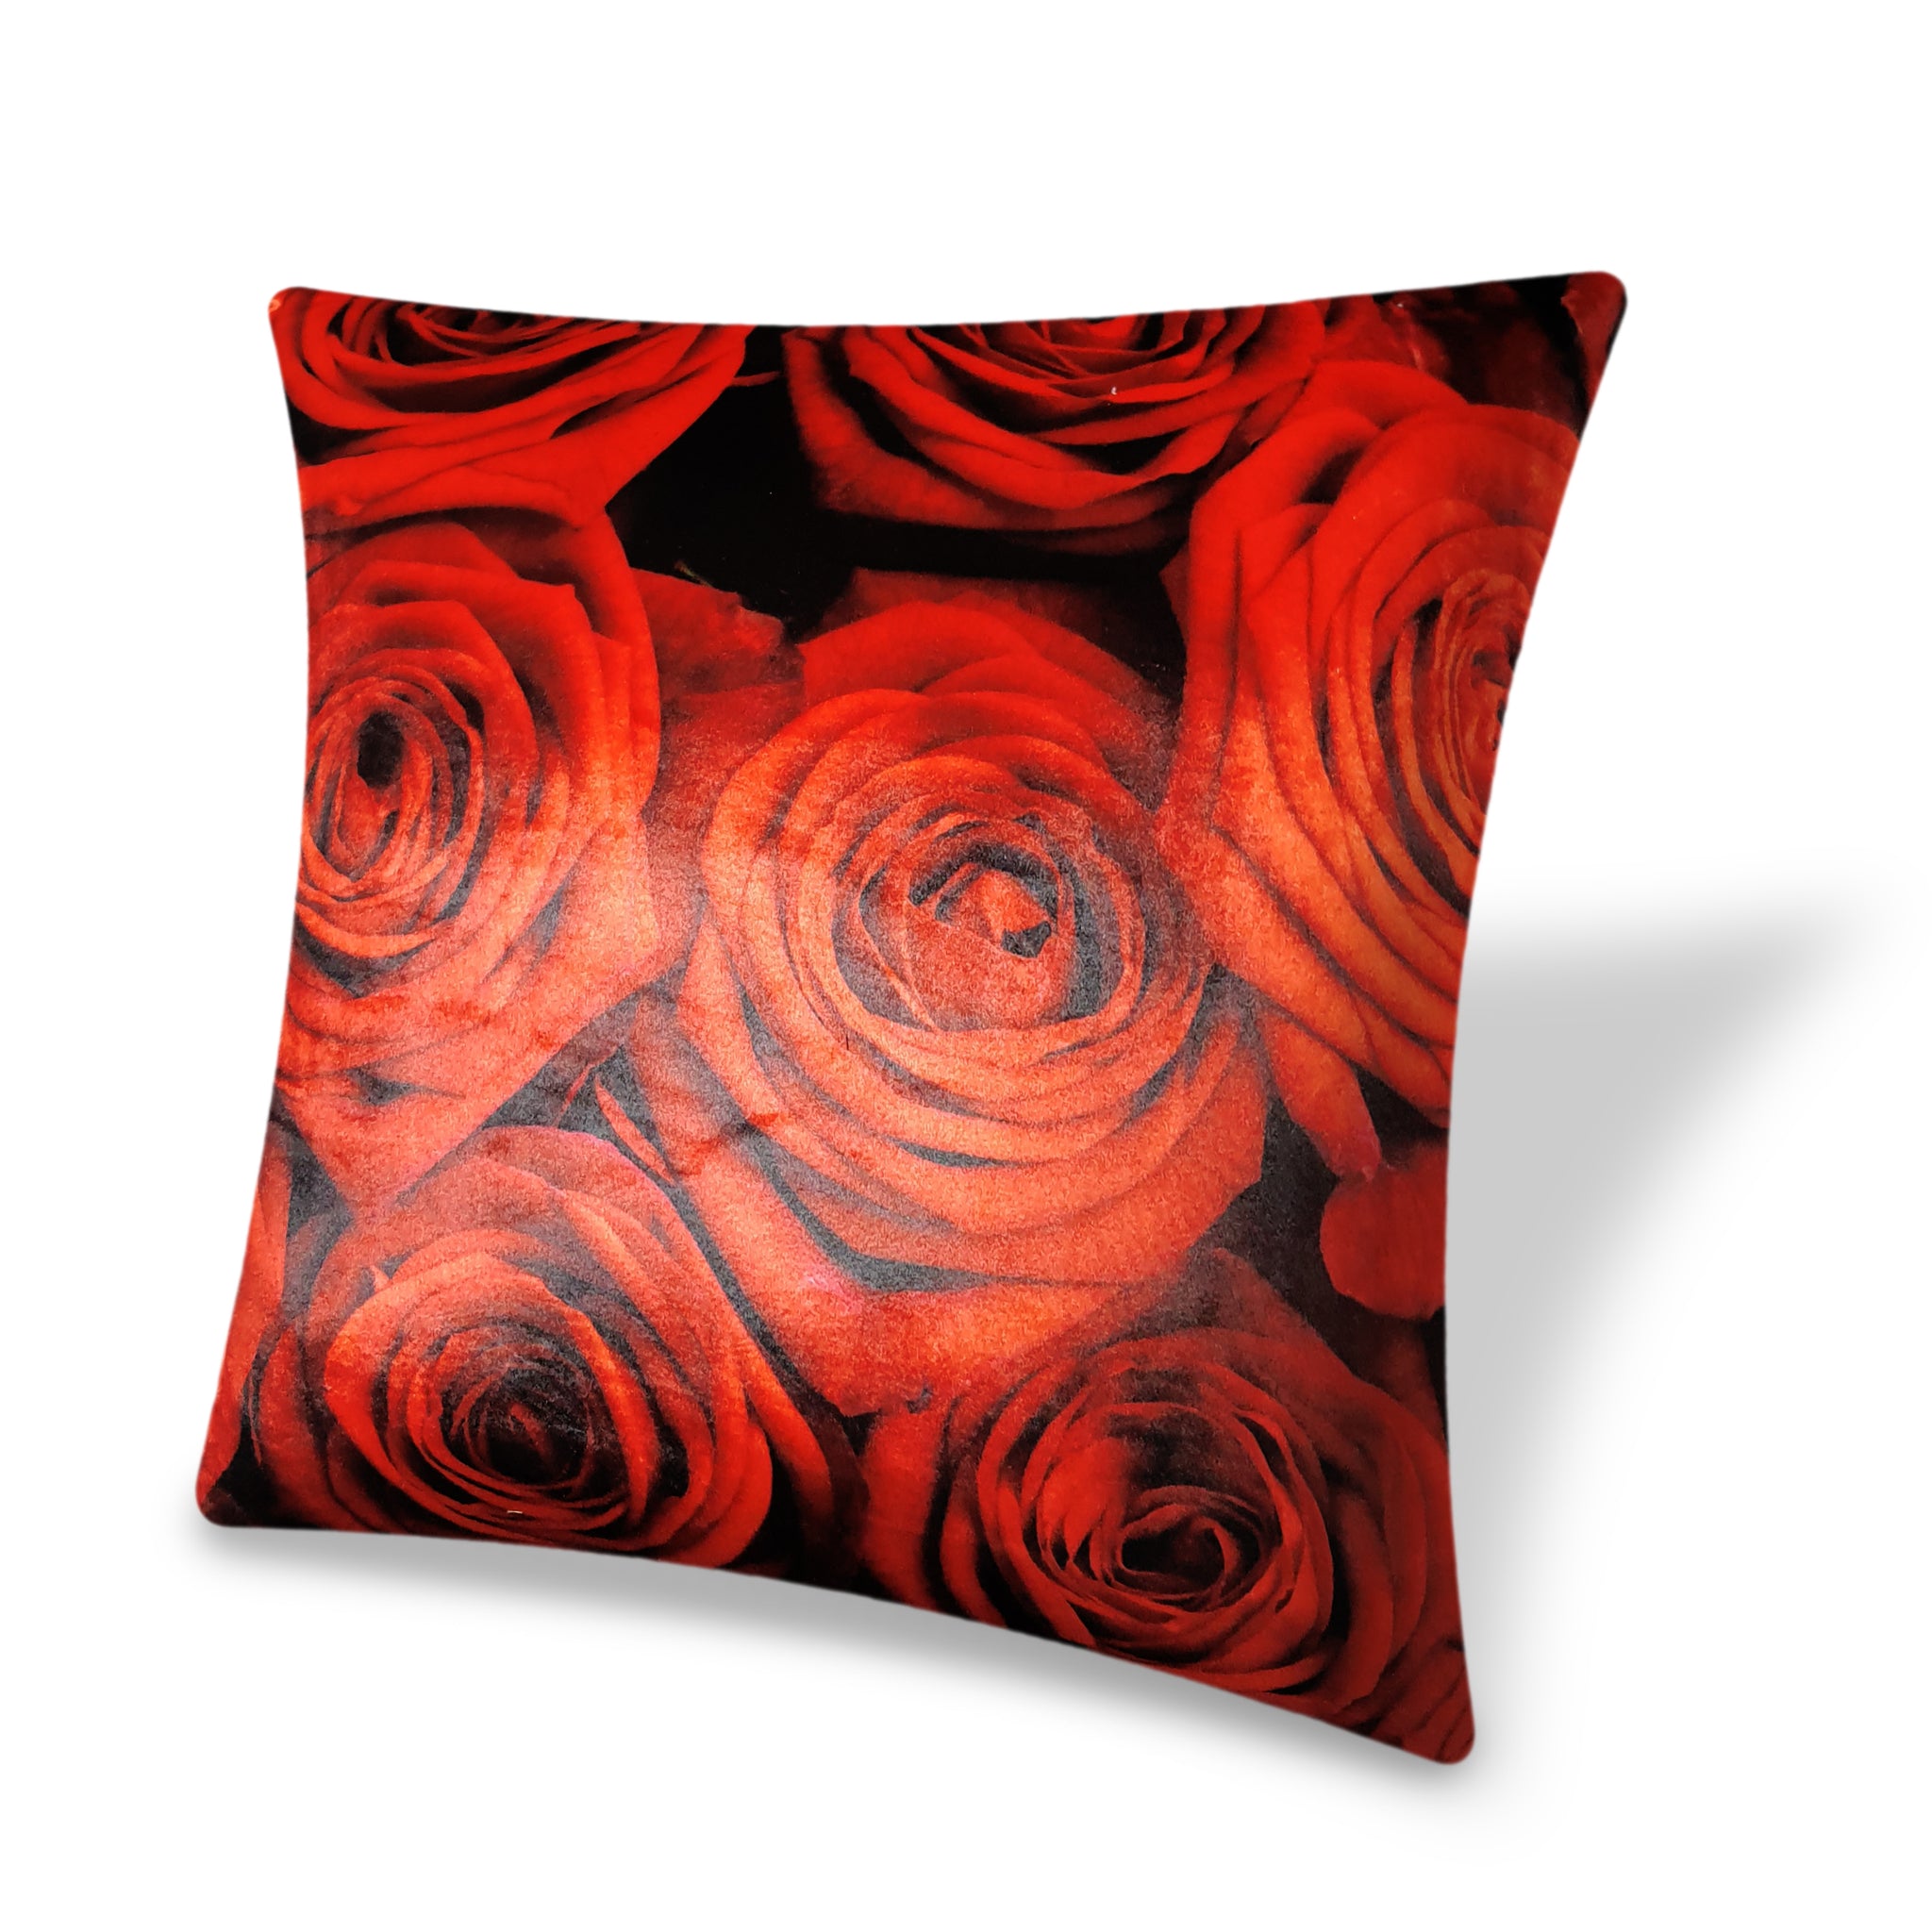 Red Velvet Cushion Cover Pure Red Rose Close-up Photo Decorative Pillowcase Modern Home Decor Throw Pillow for Sofa Chair 45x45 cm 